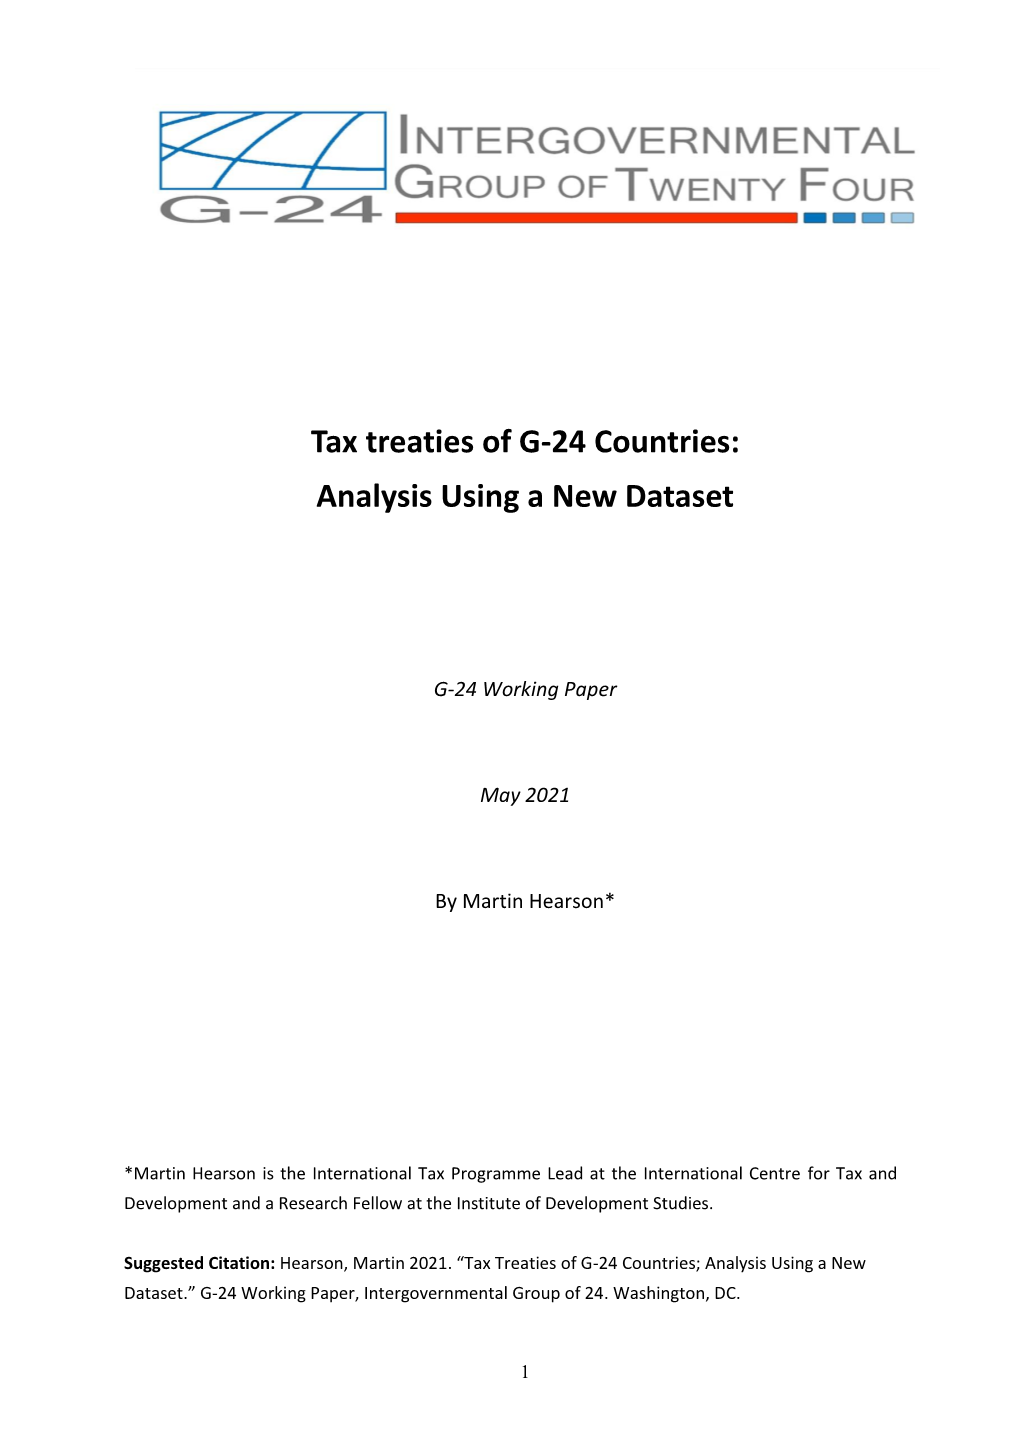 Tax Treaties of G-24 Countries: Analysis Using a New Dataset